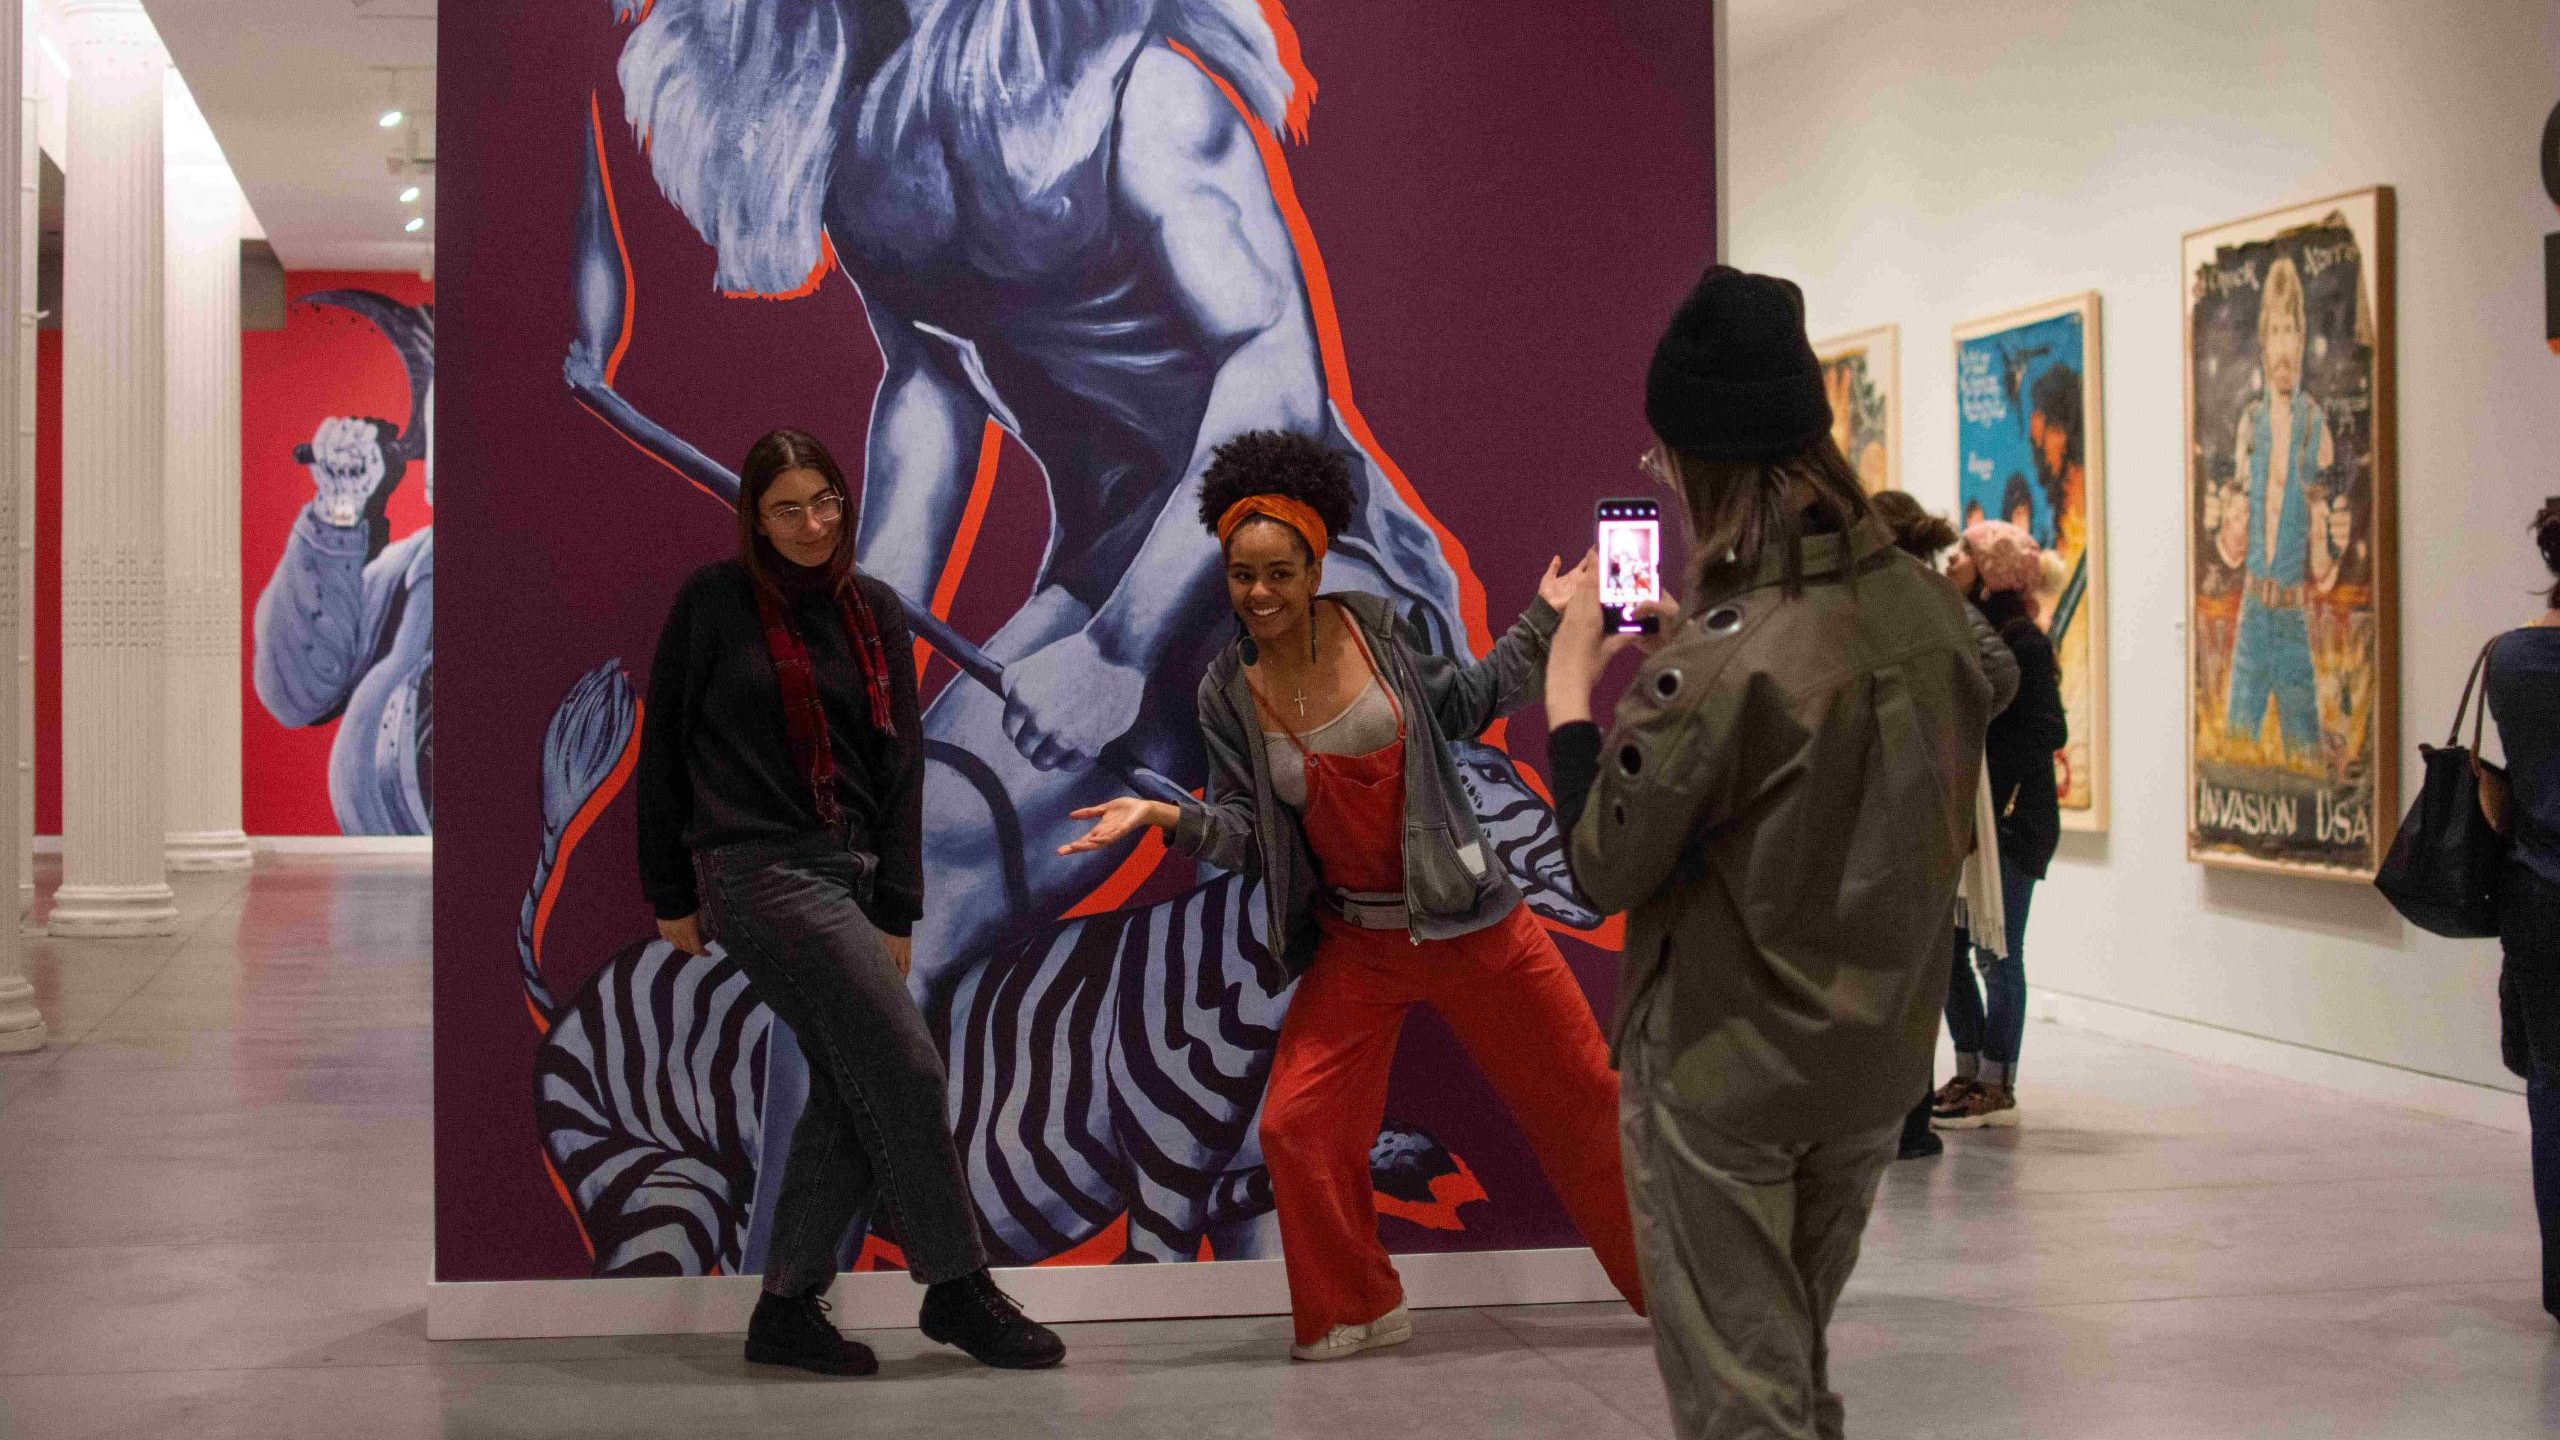 Two college students posing in a gallery while another student takes a photo of them.